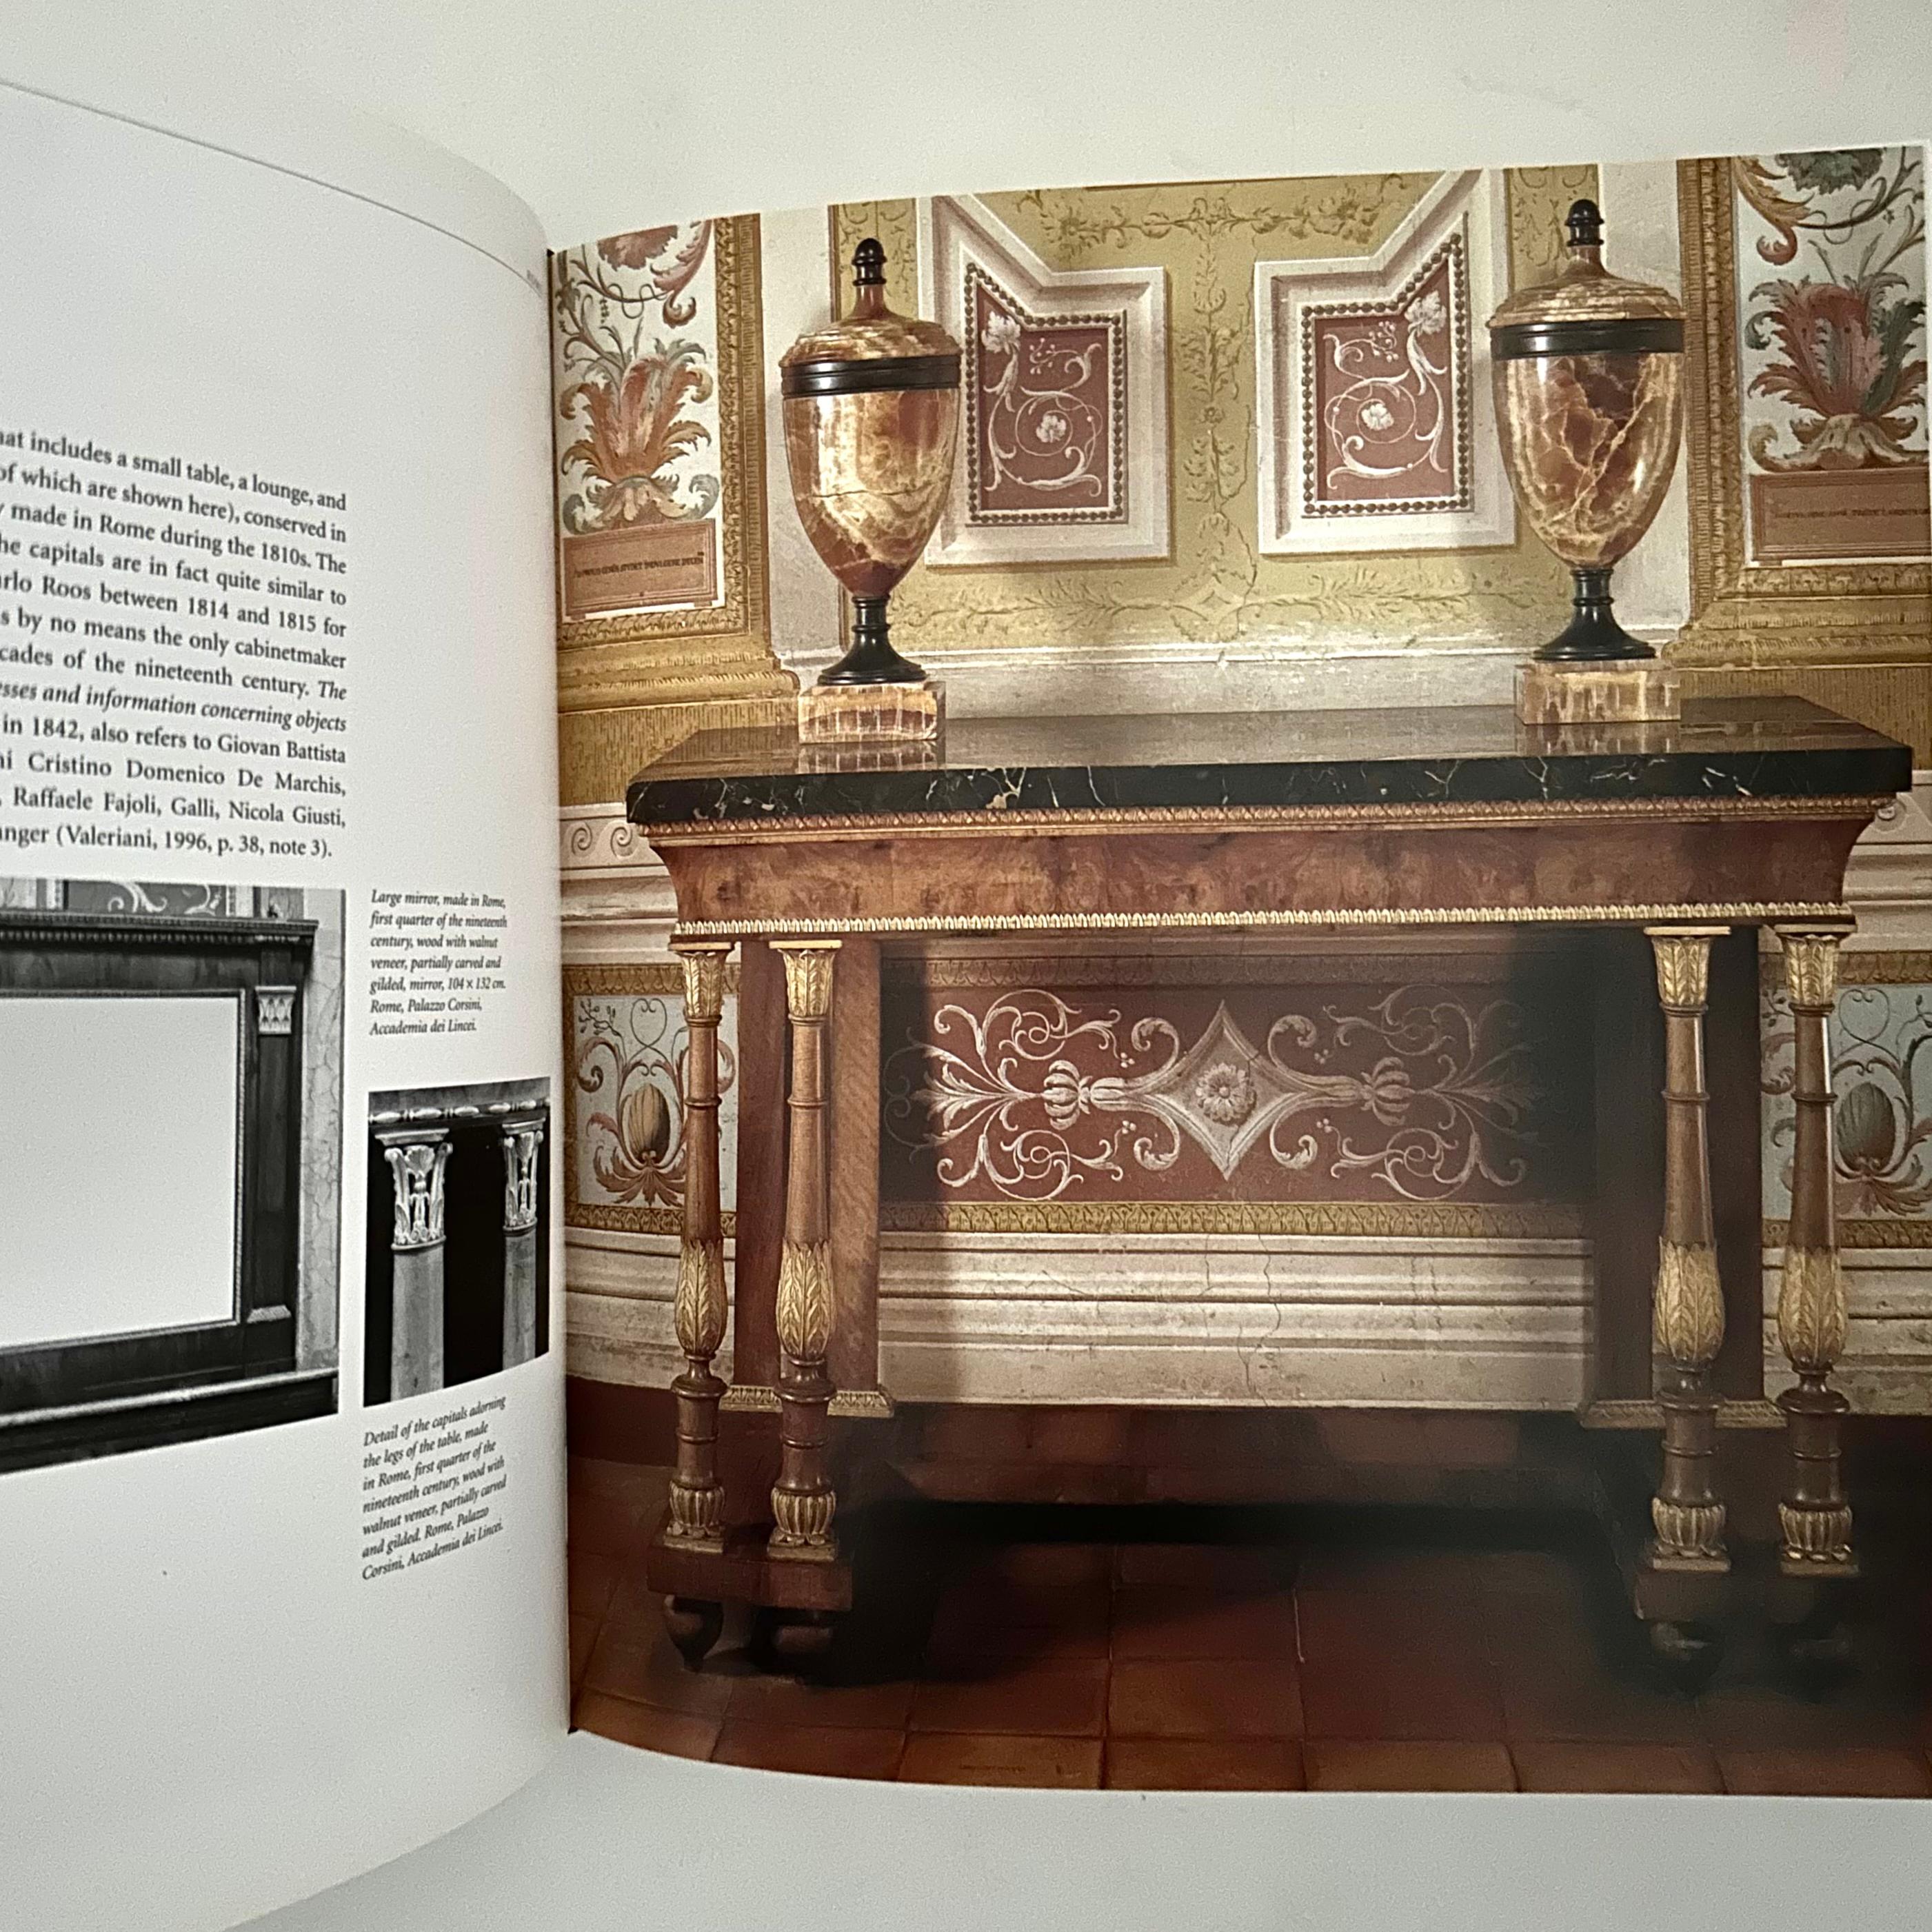 Italian Empire Furniture, Furnishings and Interior Design 1800 -1843

Published by Rizzoli, New York / Philadelphia, 1998. Hard Cover in Slipcase. First Printing. 

Napoleon's arrival in Italy in the late 18th century had far-reaching effects on the